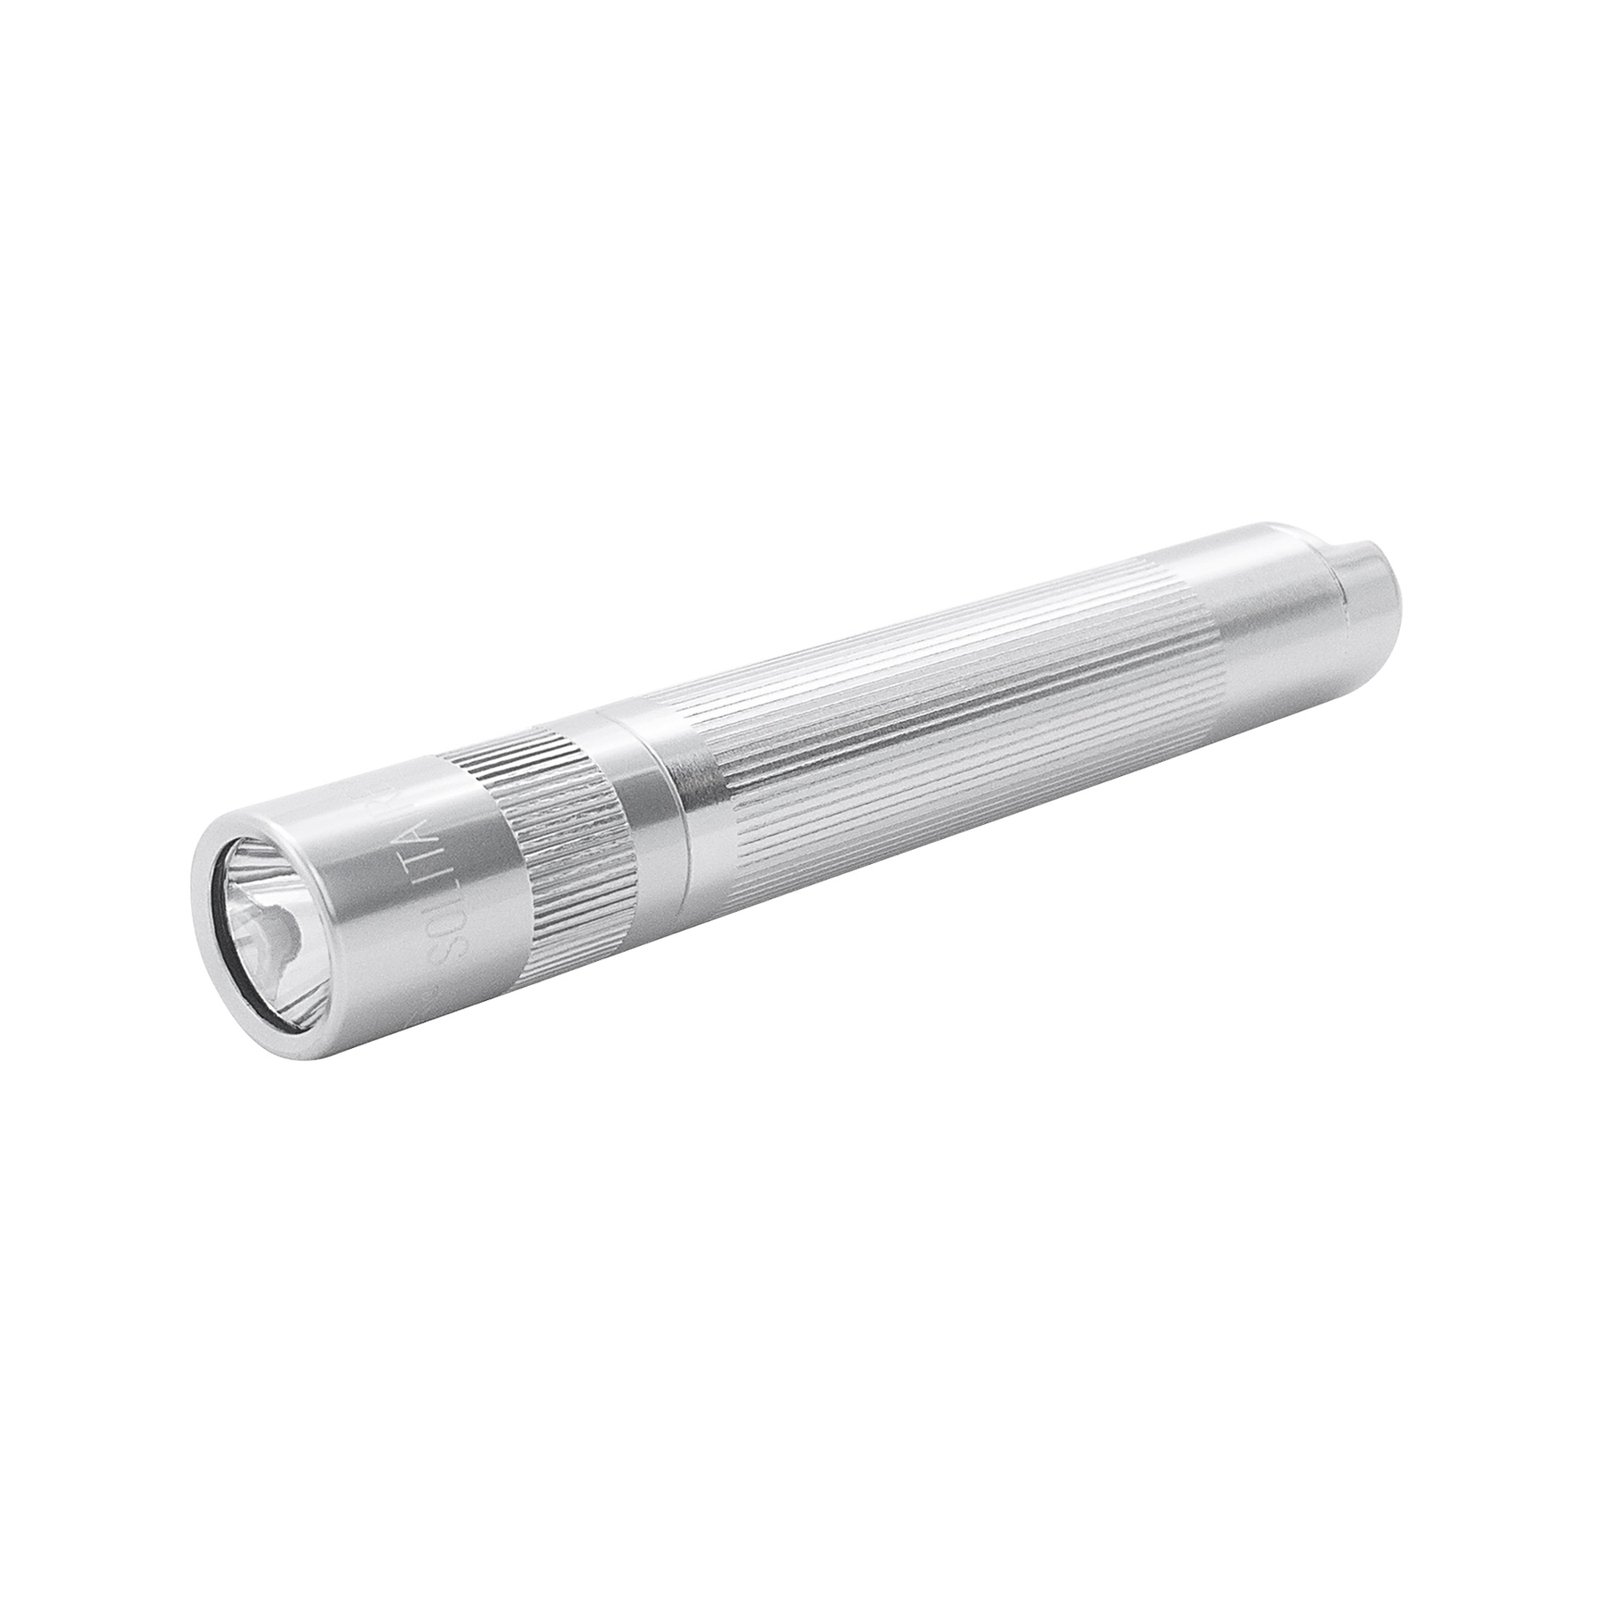 Maglite Xenon torch Solitaire 1-Cell AAA, silver